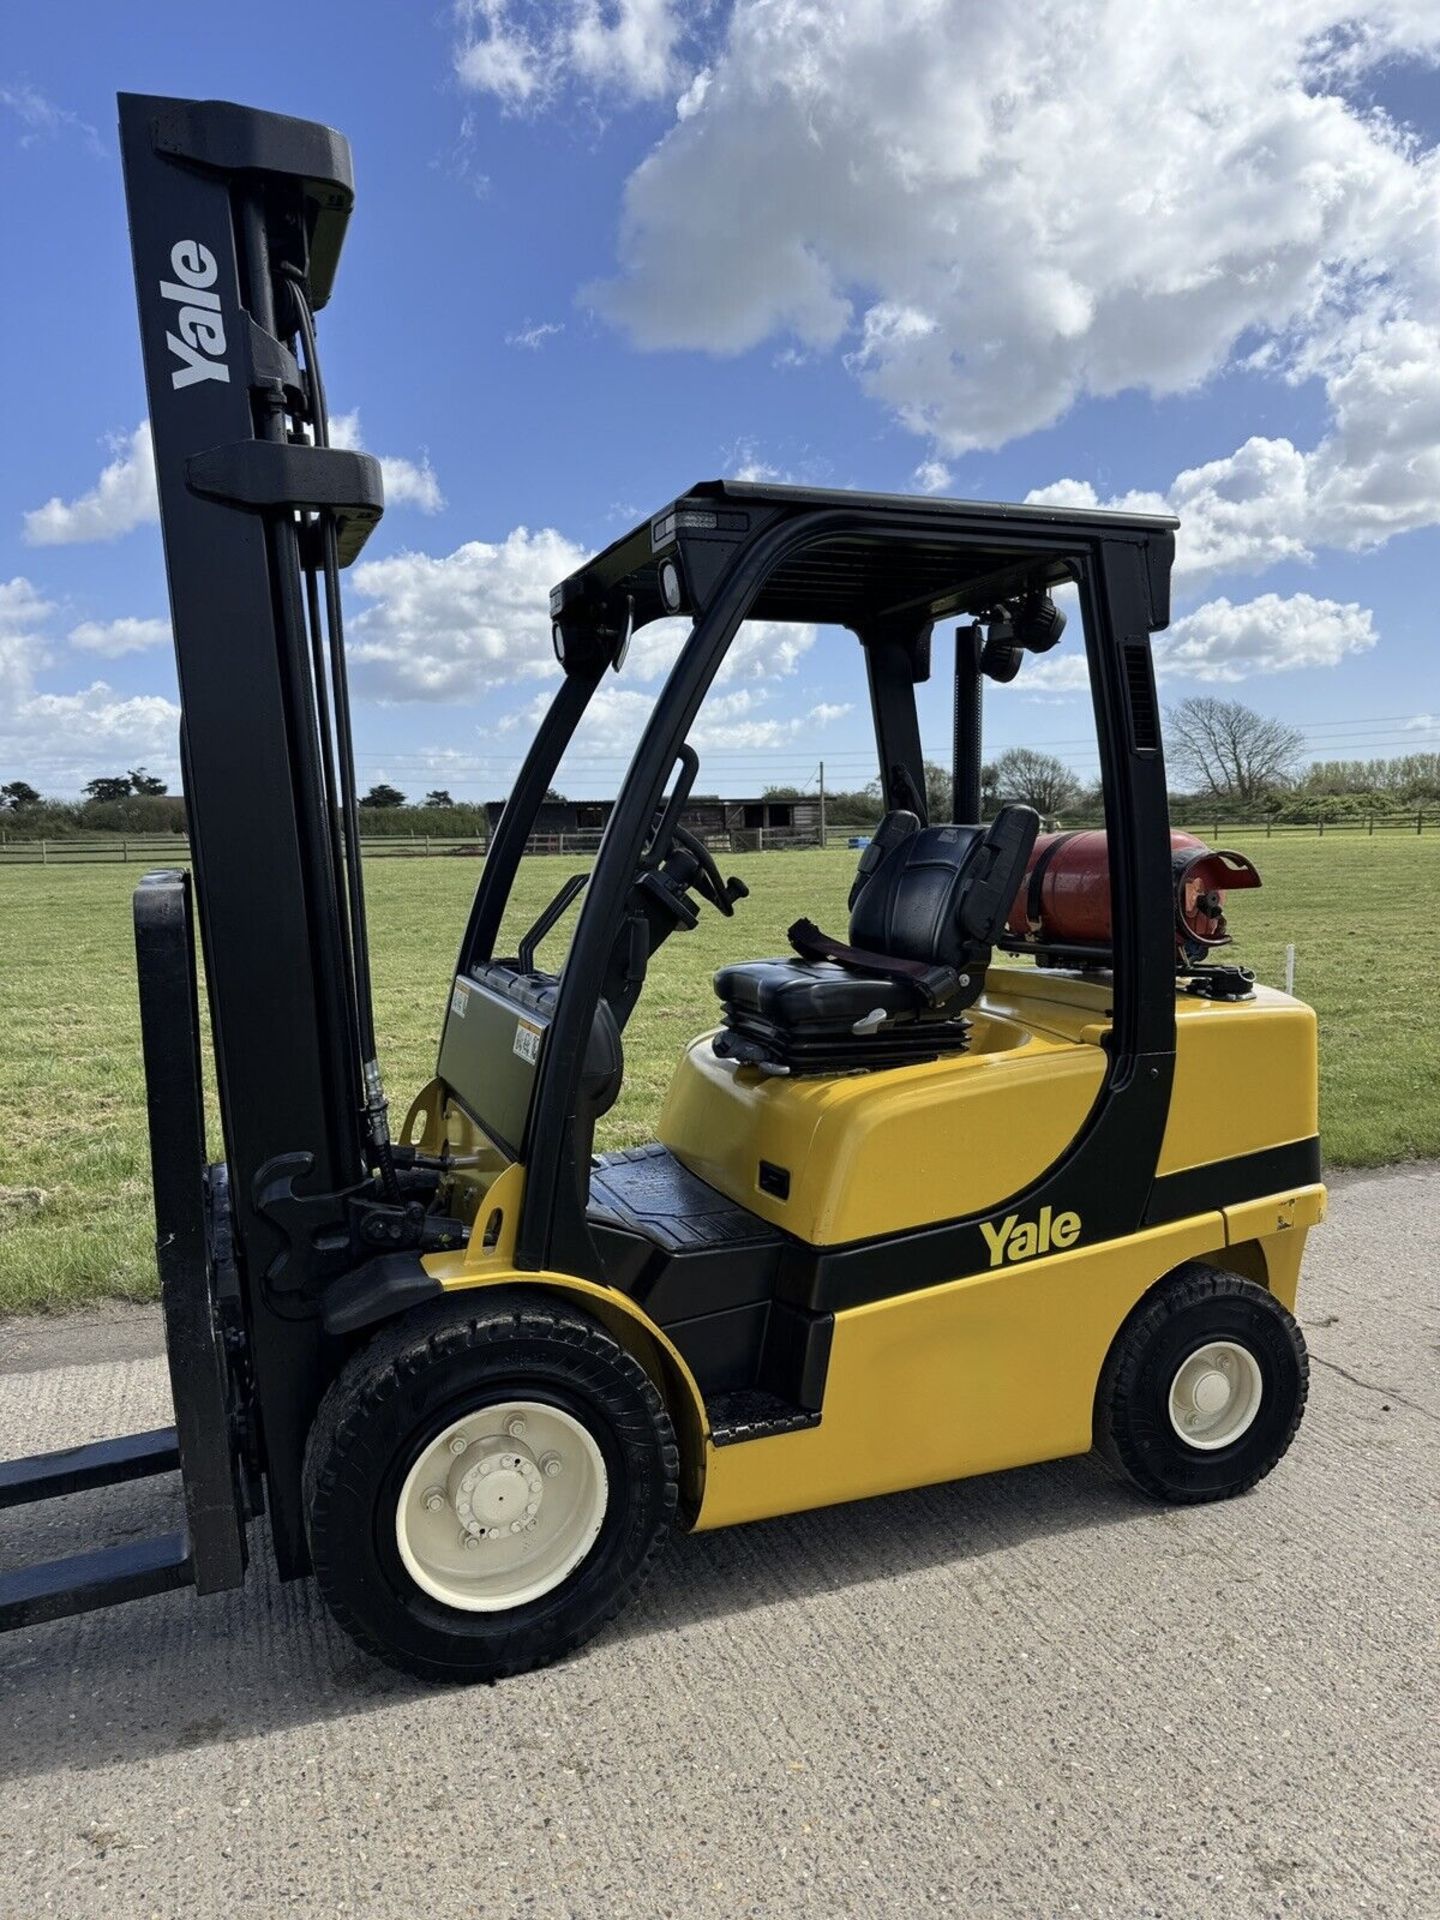 2017 - YALE Gas Forklift Truck (5.9 m lift) - Only 2200 Hours - Image 2 of 7